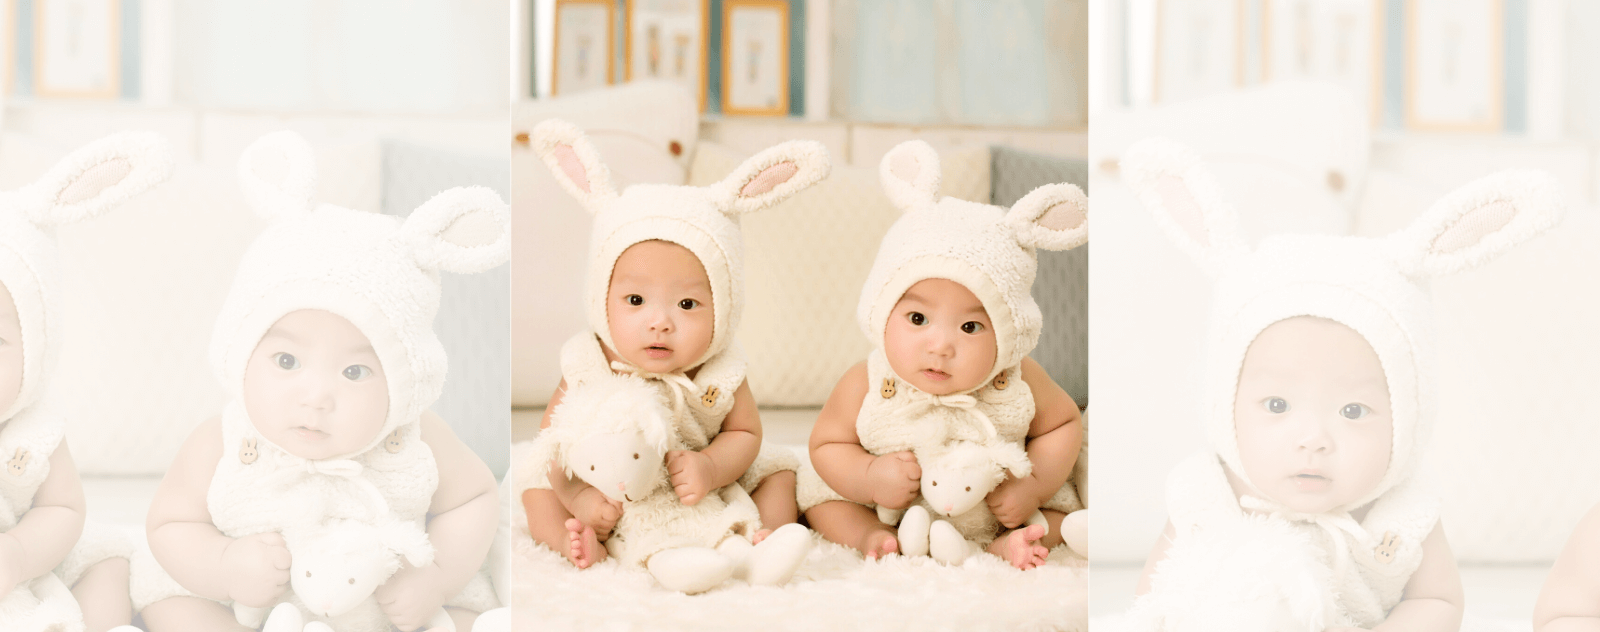 Cute Babies with their Clean White Stuffed Animals